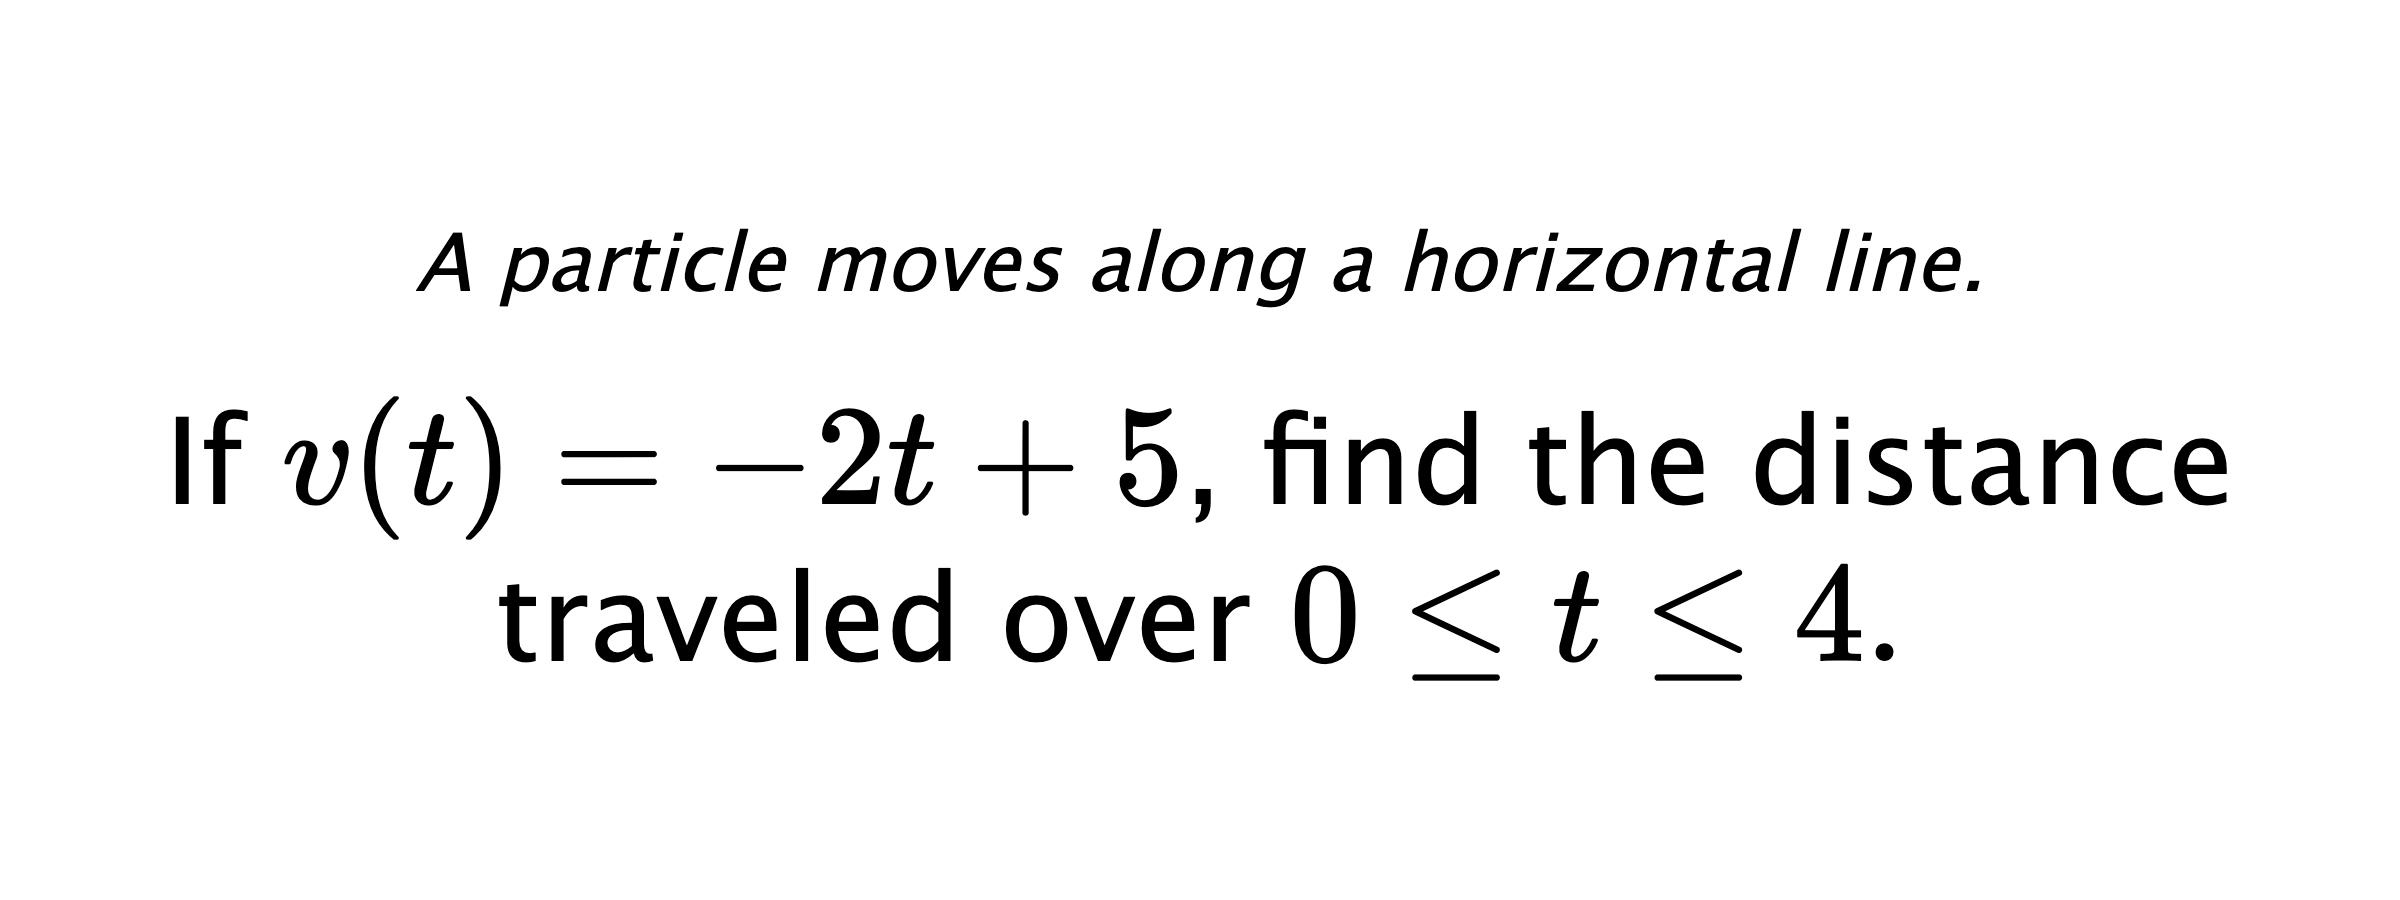 A particle moves along a horizontal line. If $ v(t)=-2t+5 $, find the distance traveled over $ 0 \leq t \leq 4 .$